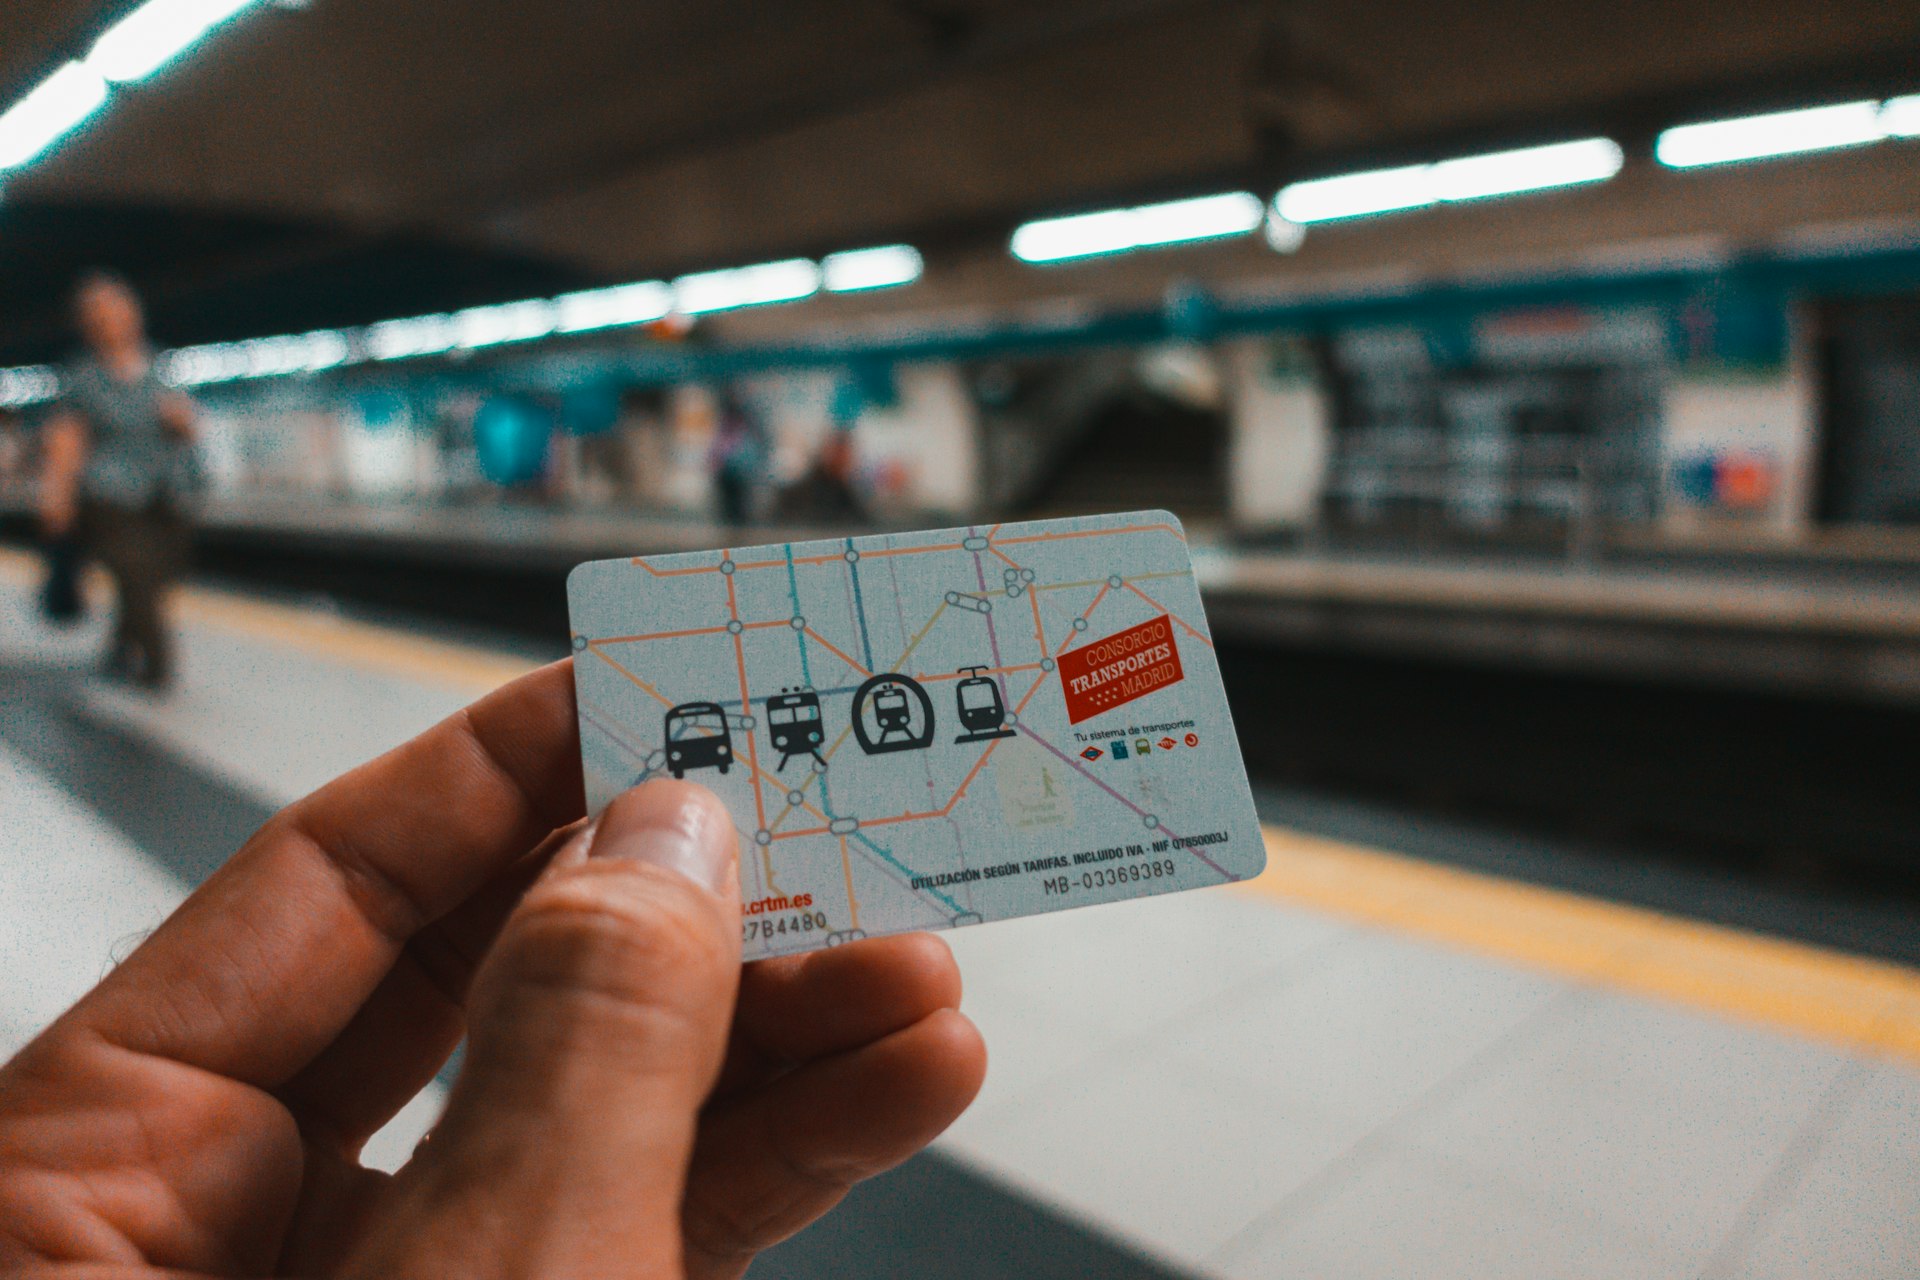 A person's hand holding the tourist travel pass of Madrid at an underground metro station